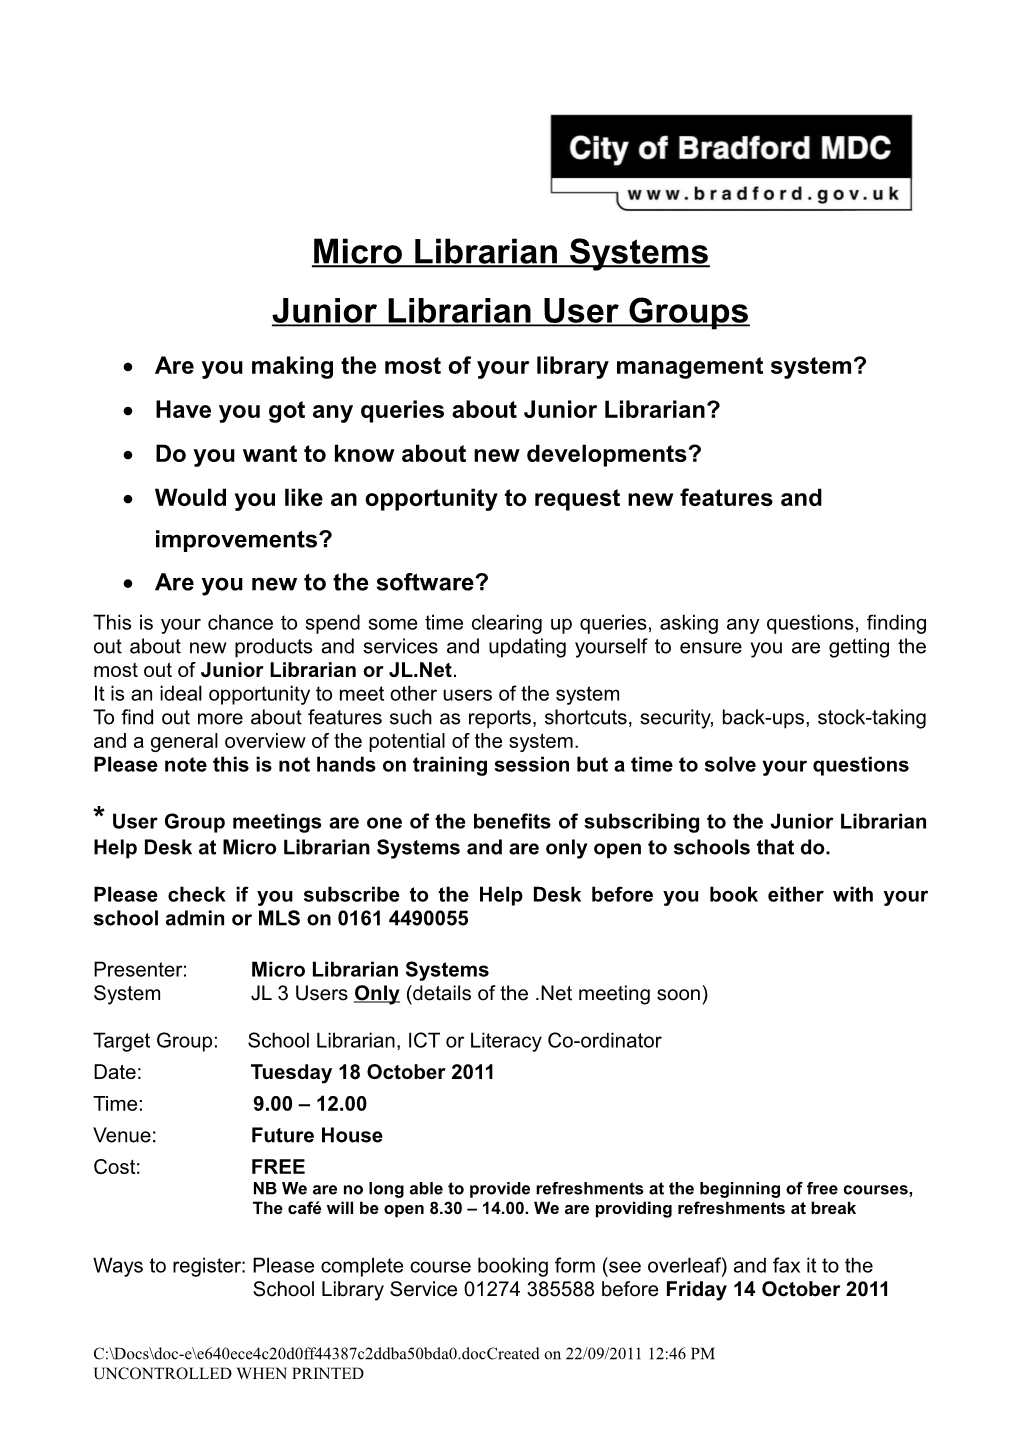 Micro Librarian Systems